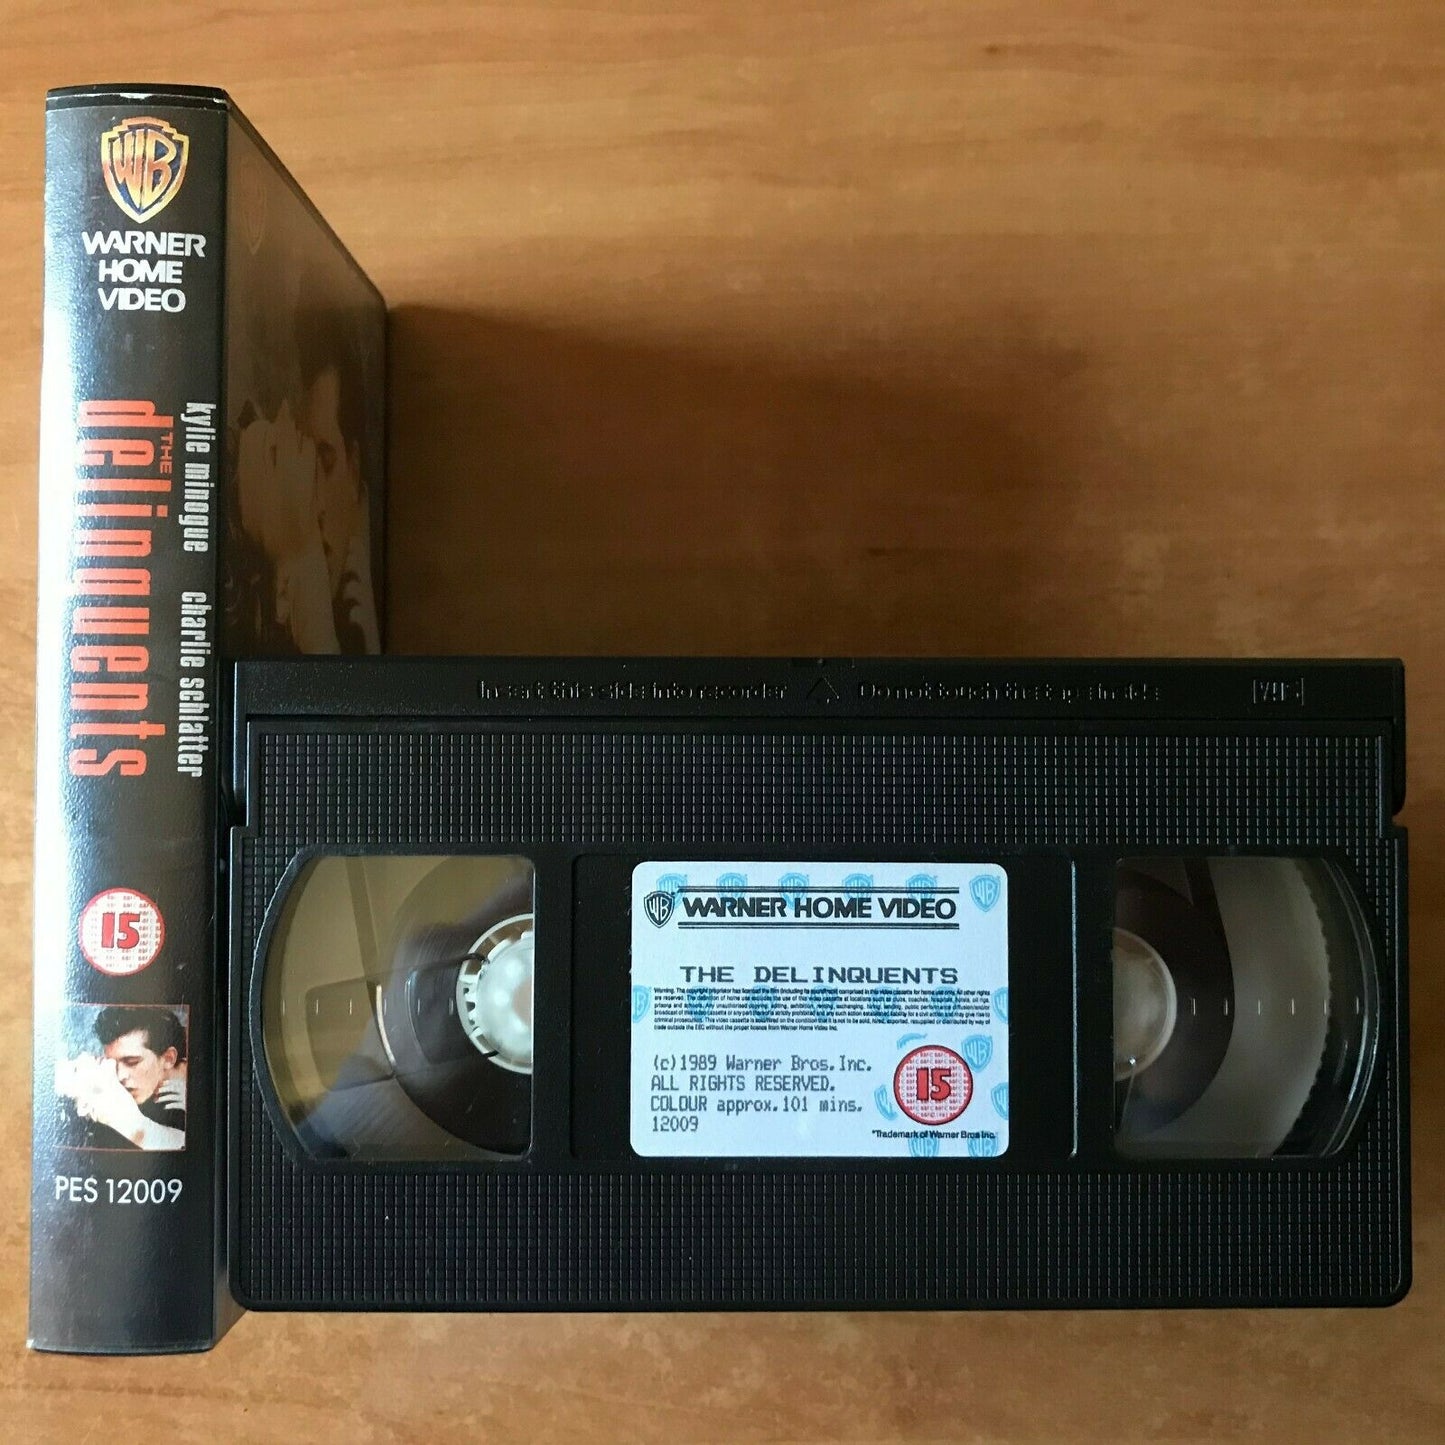 The Delinquents: Kylie Minogue's Film Debut (1989); Romance & Drama- VHS-